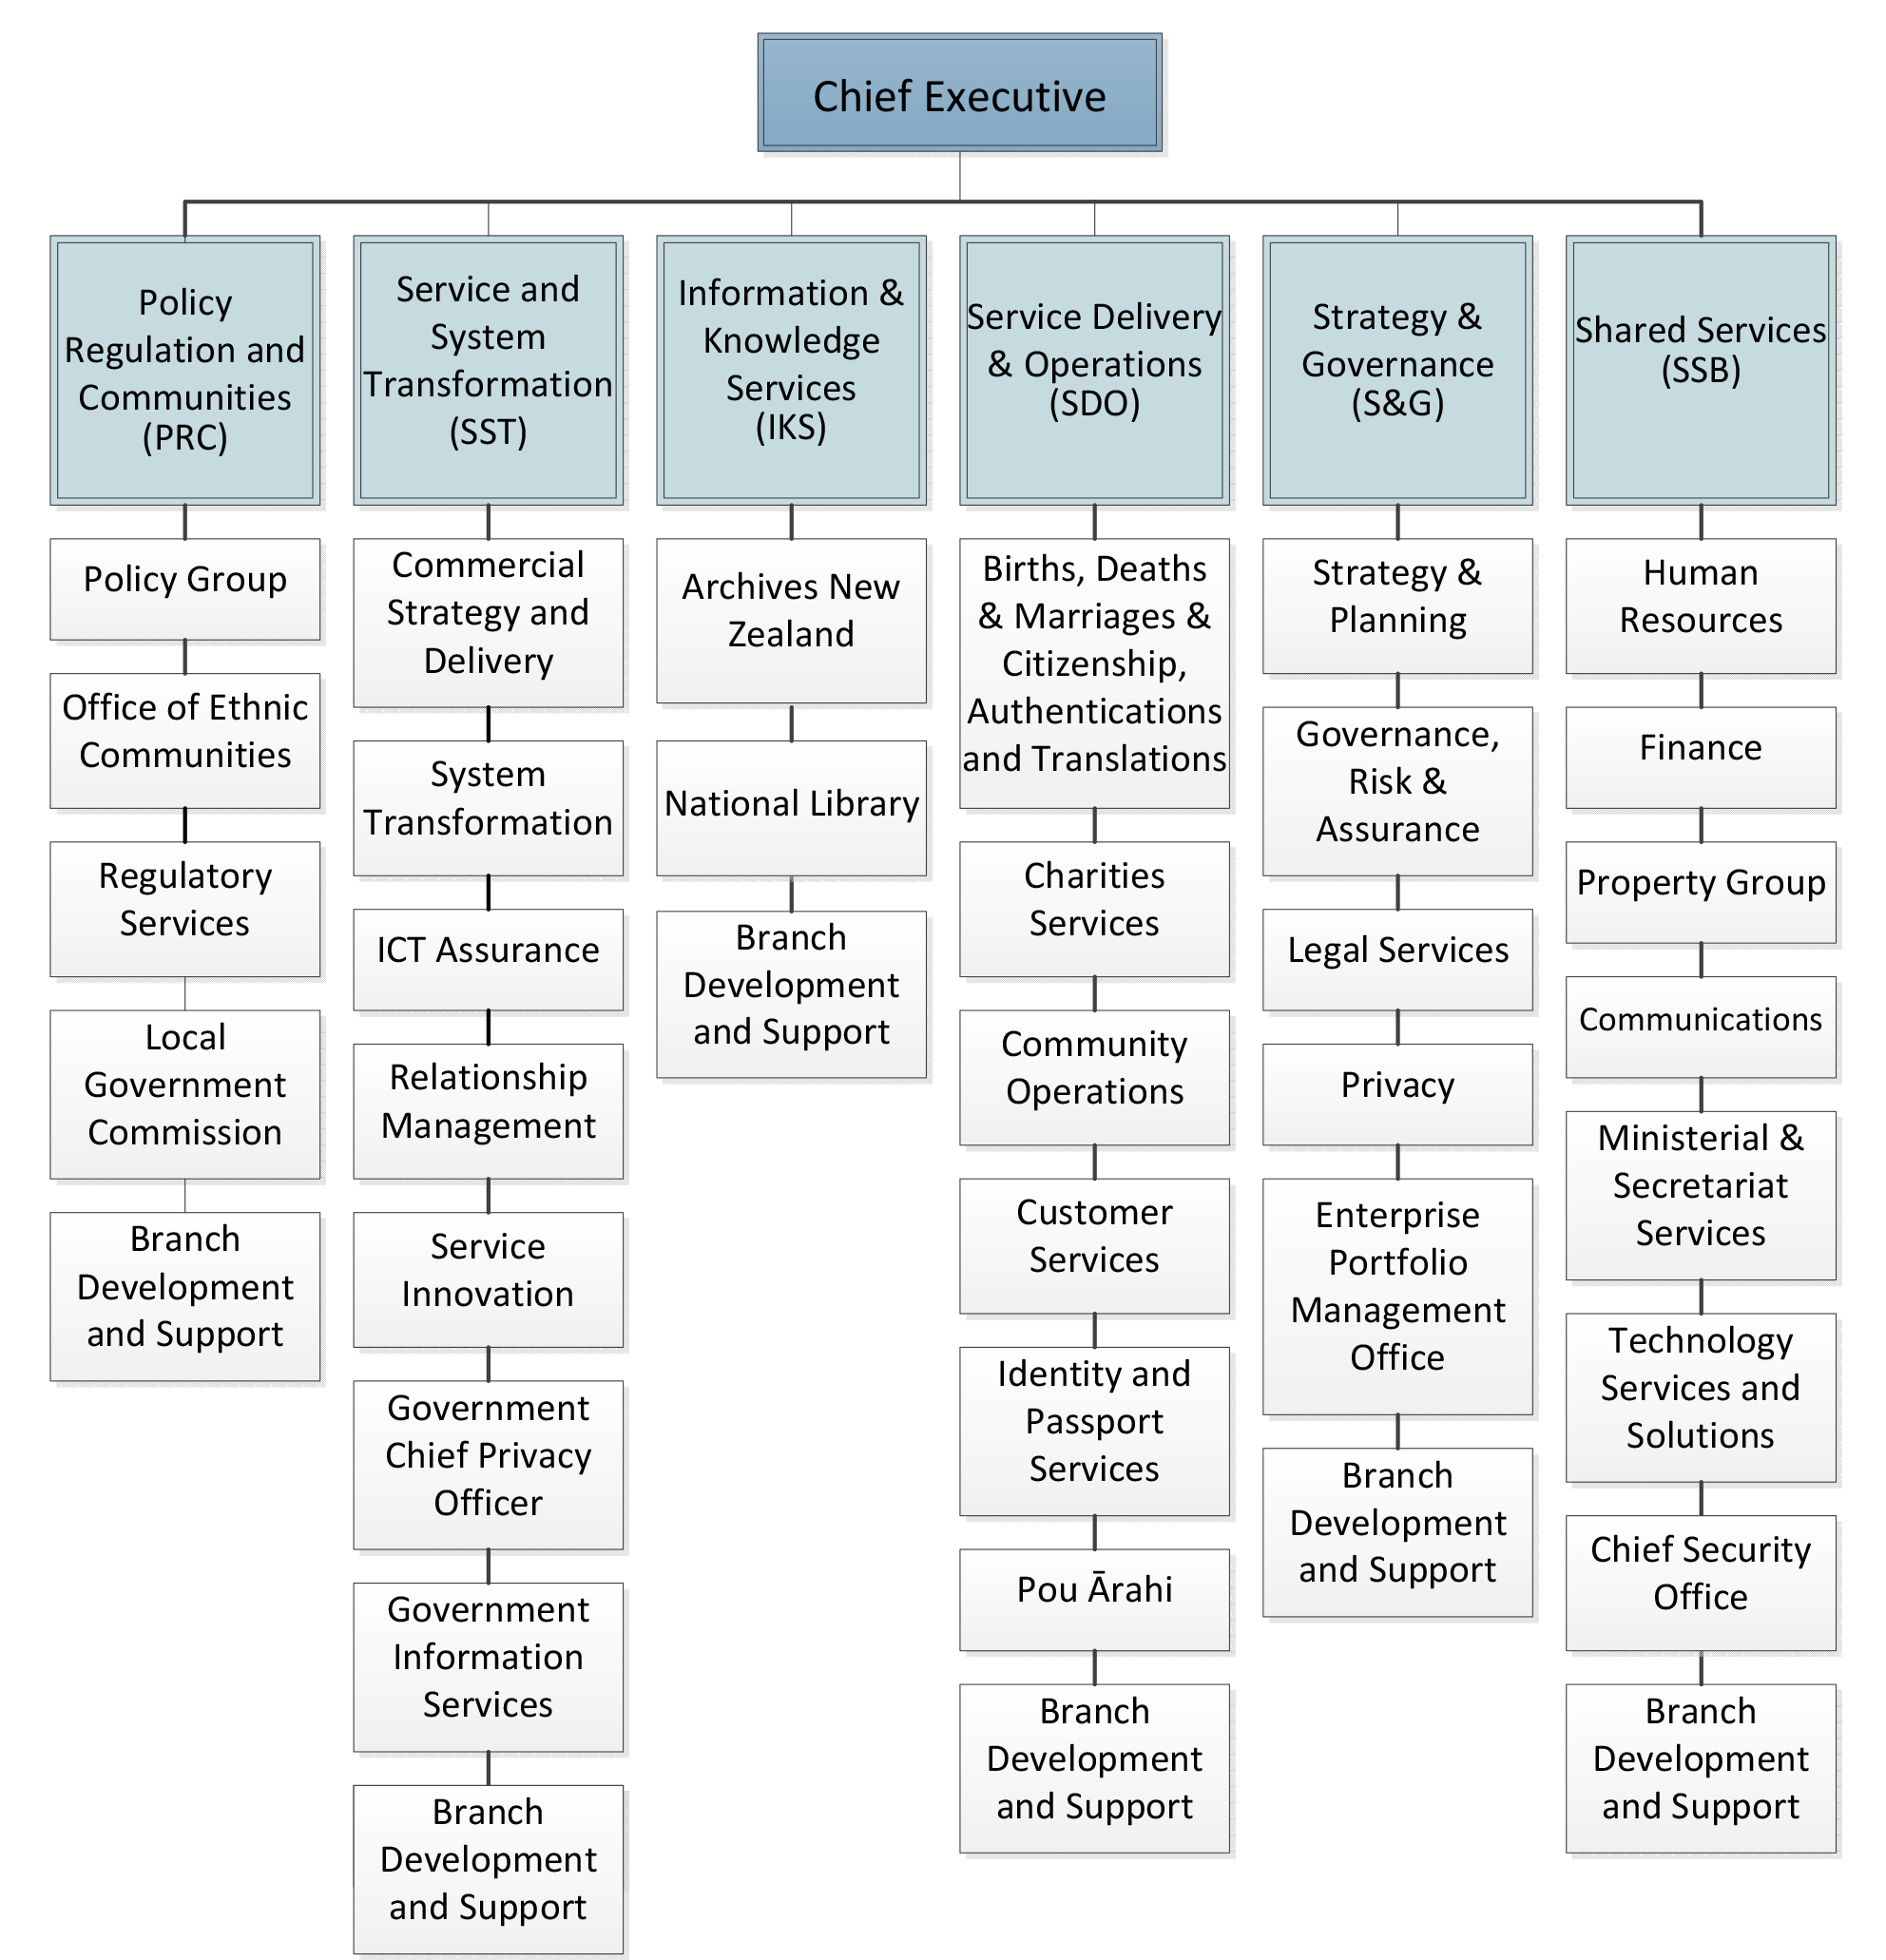 Internal affairs перевод на русский. LAPD Organizational Chart. LAPD Organization Chart. NYPD structure. Minister of Internal Affairs of British structure.